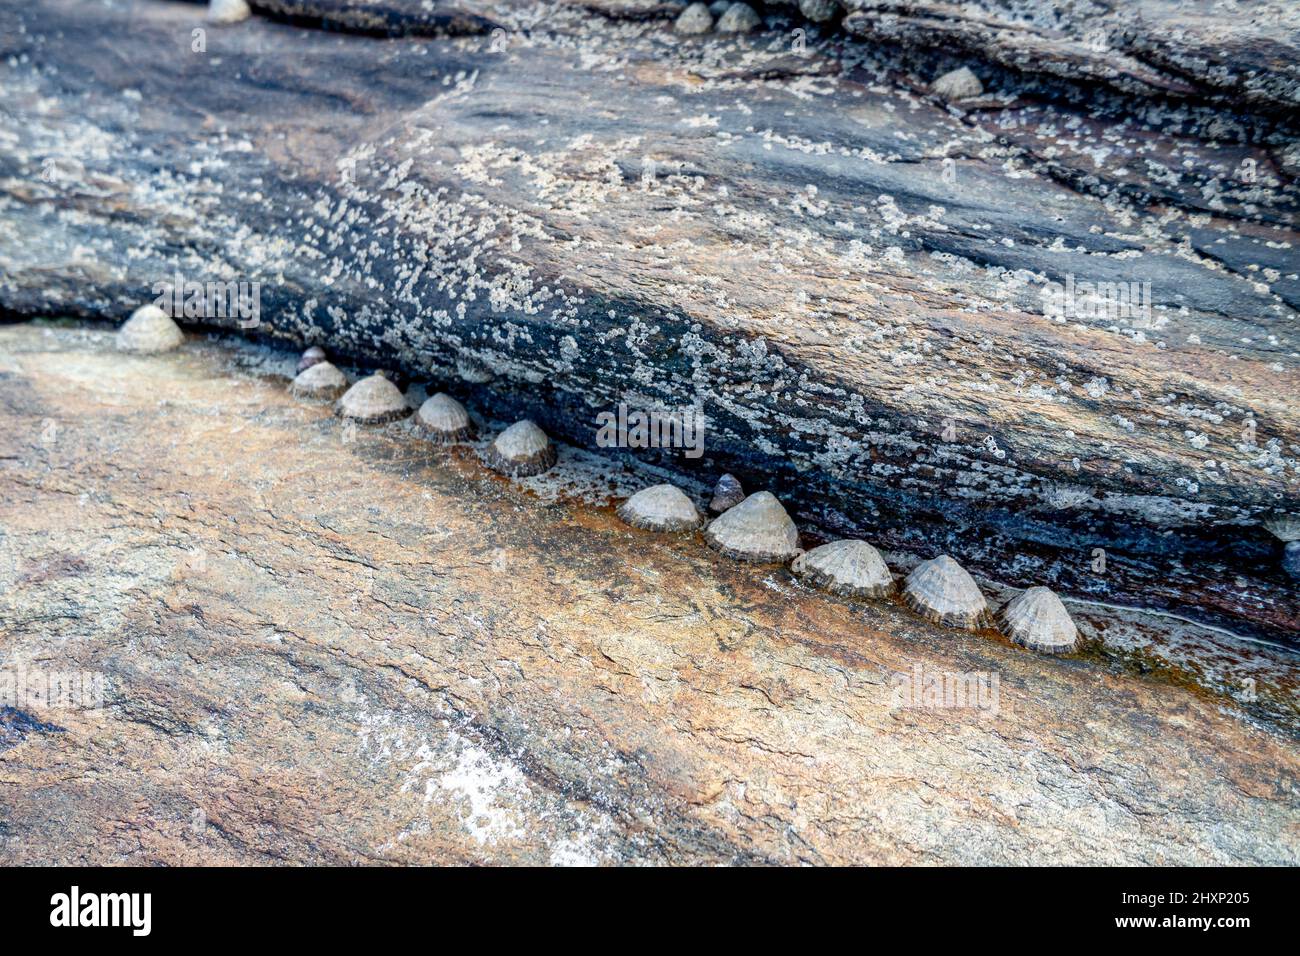 Group of common limpet snail shells clinging to stones at a beach in Ireland. Stock Photo